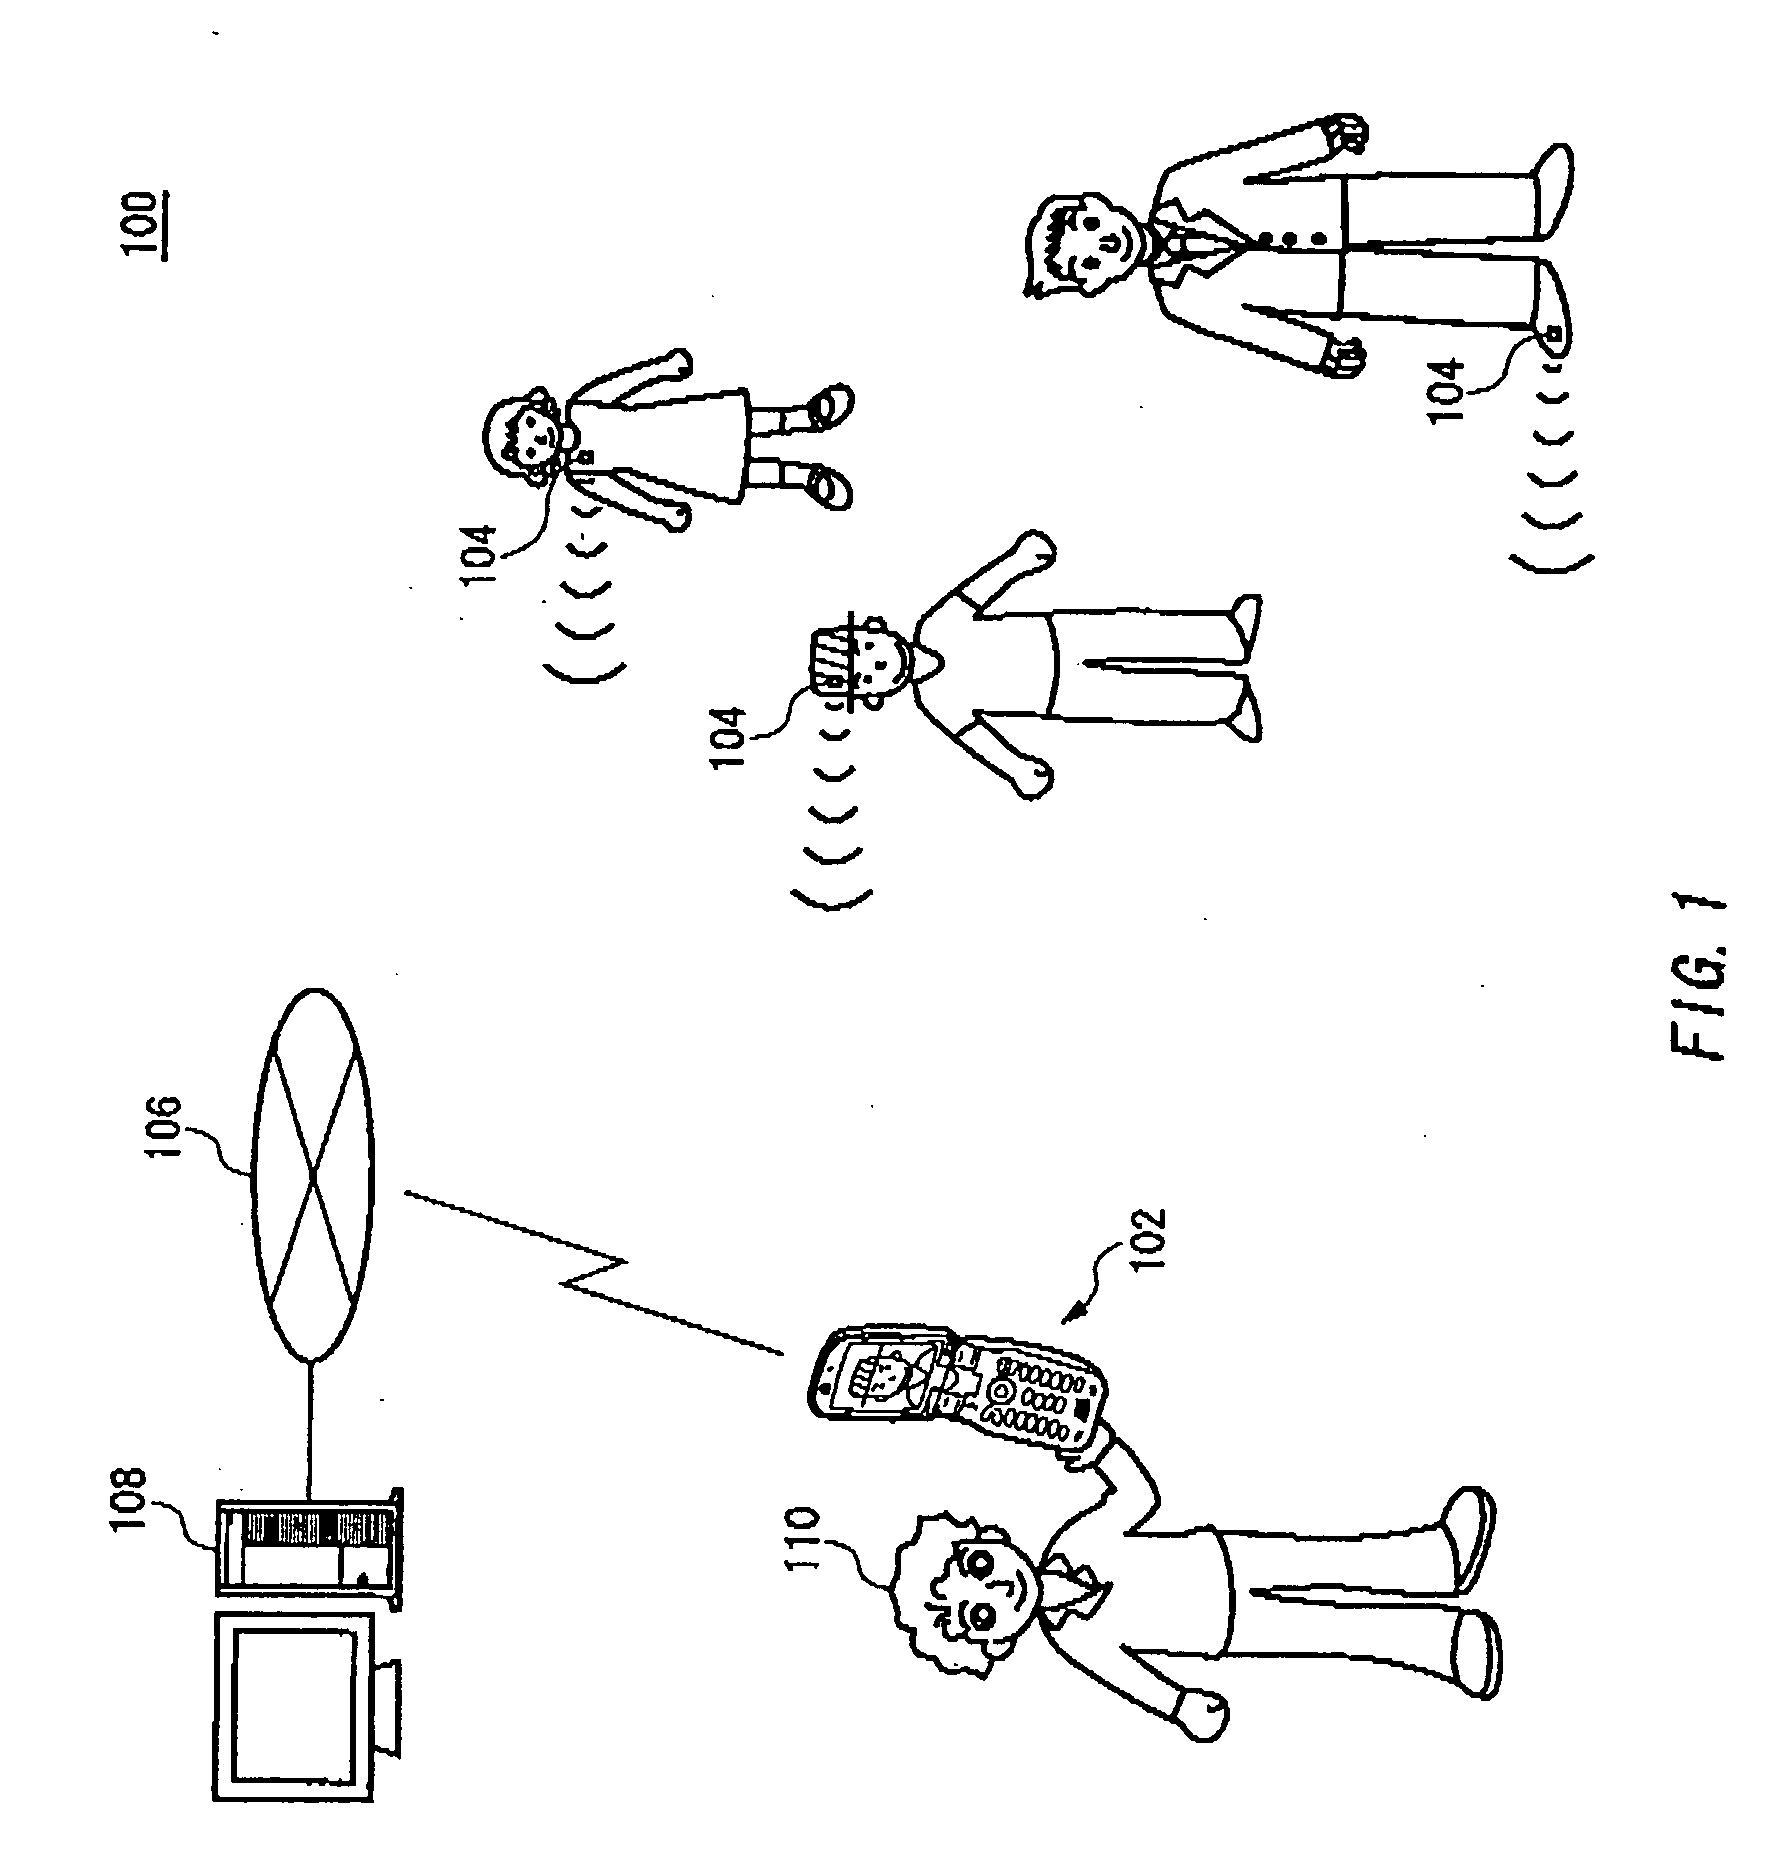 Imaging device, information storage server, article identification apparatus and imaging system